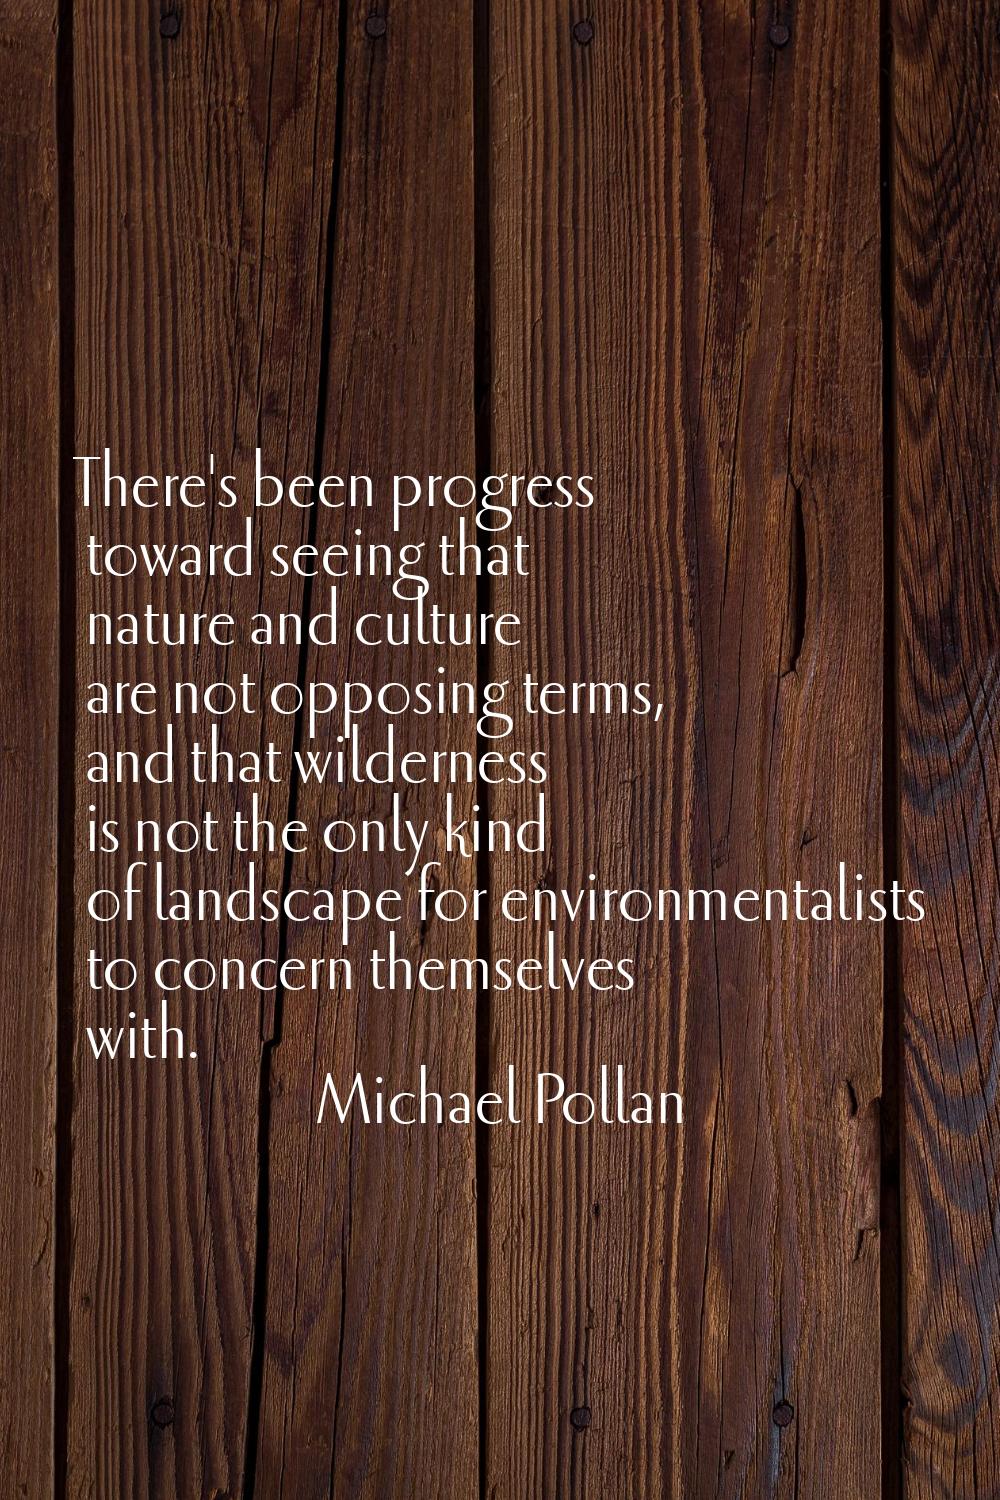 There's been progress toward seeing that nature and culture are not opposing terms, and that wilder